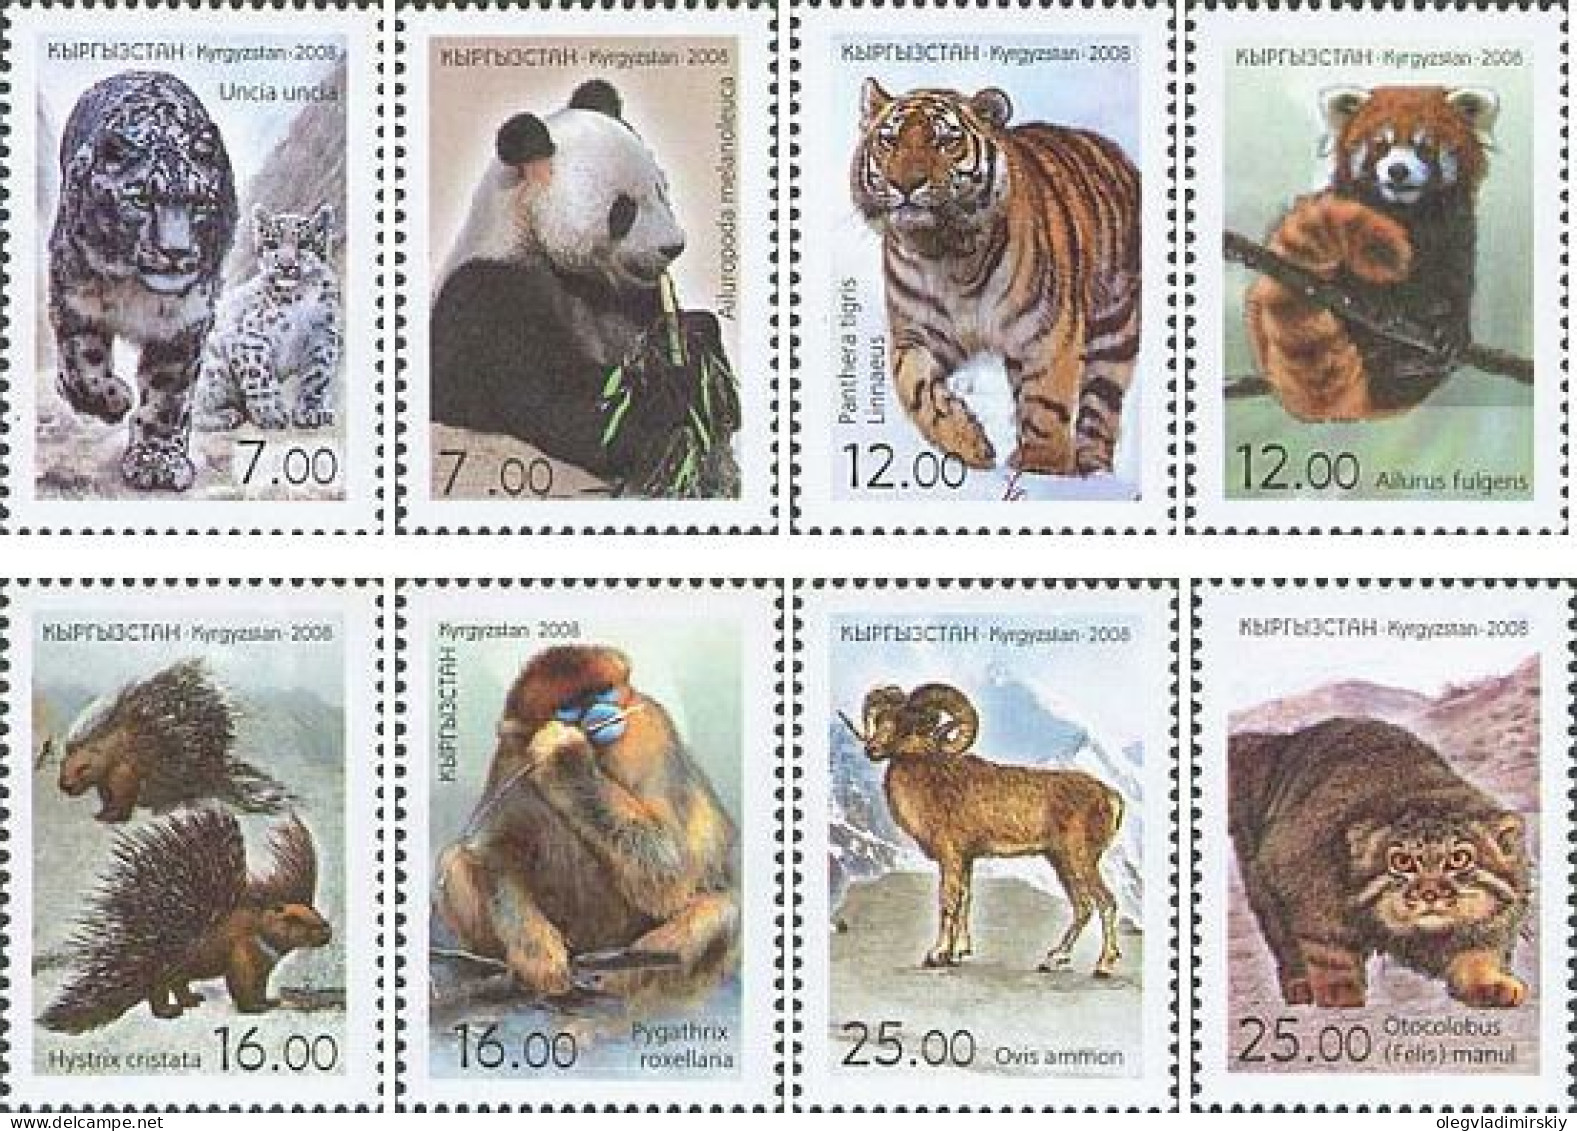 Kyrgyzstan 2008 Animals Of Asia From The Red Book Set Of 8 Perforated Stamps MNH - Kirgisistan